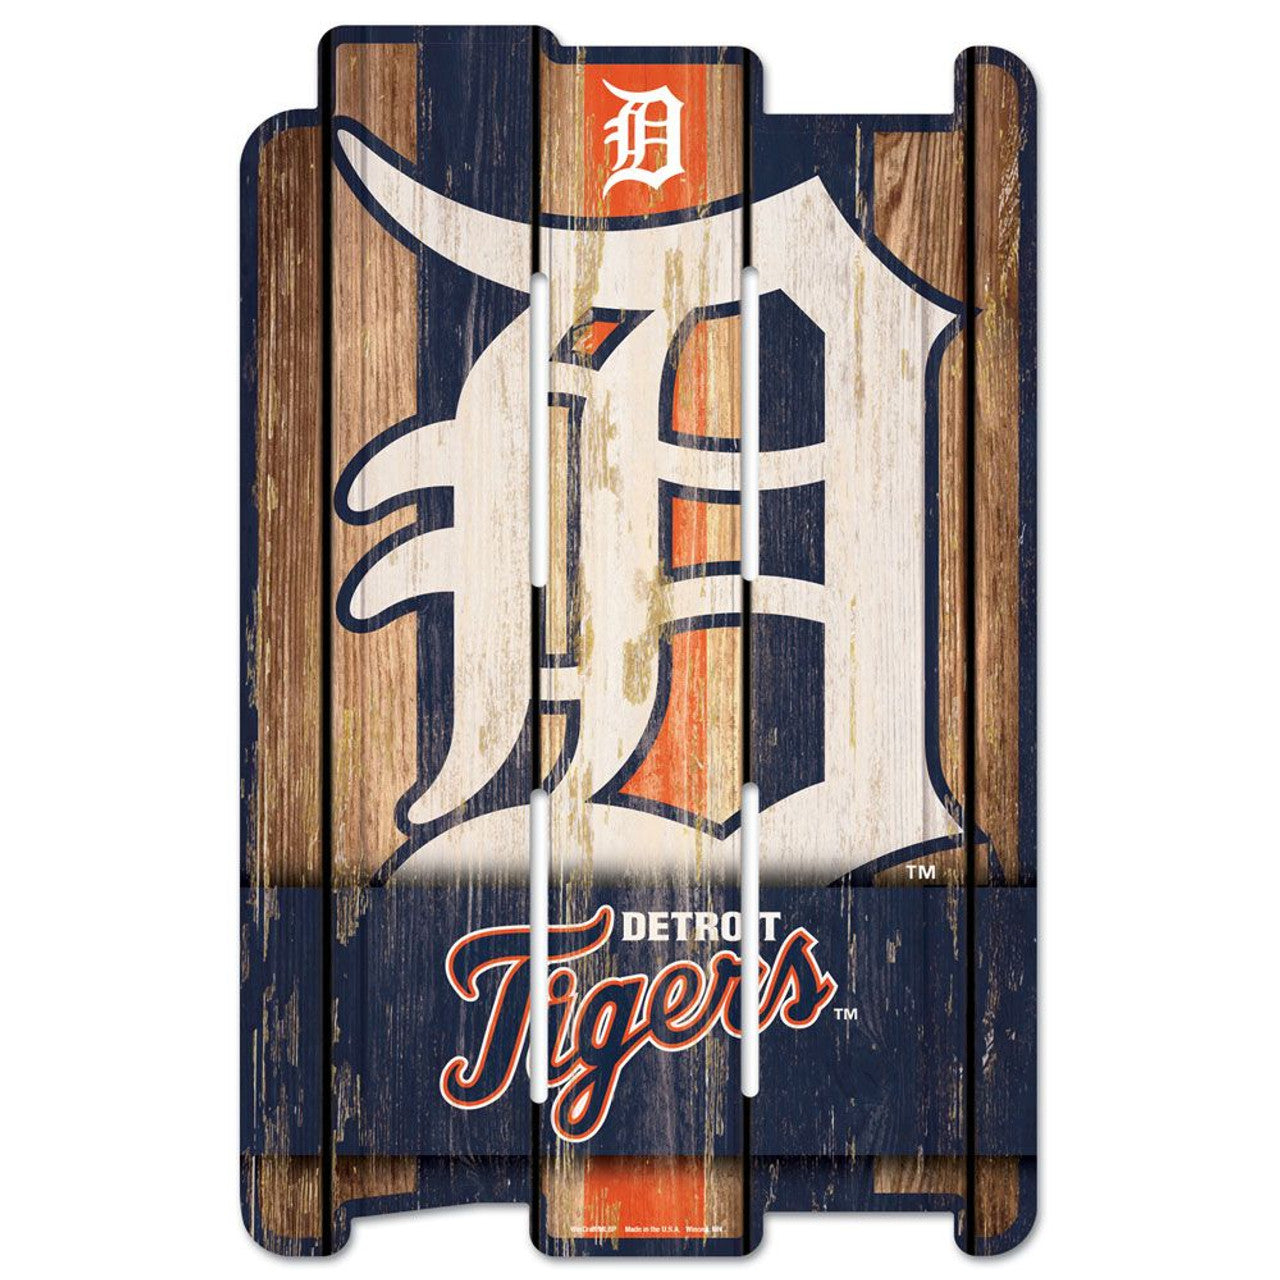 Detroit Tigers 11" x 17" Wood Fence Sign by Wincraft